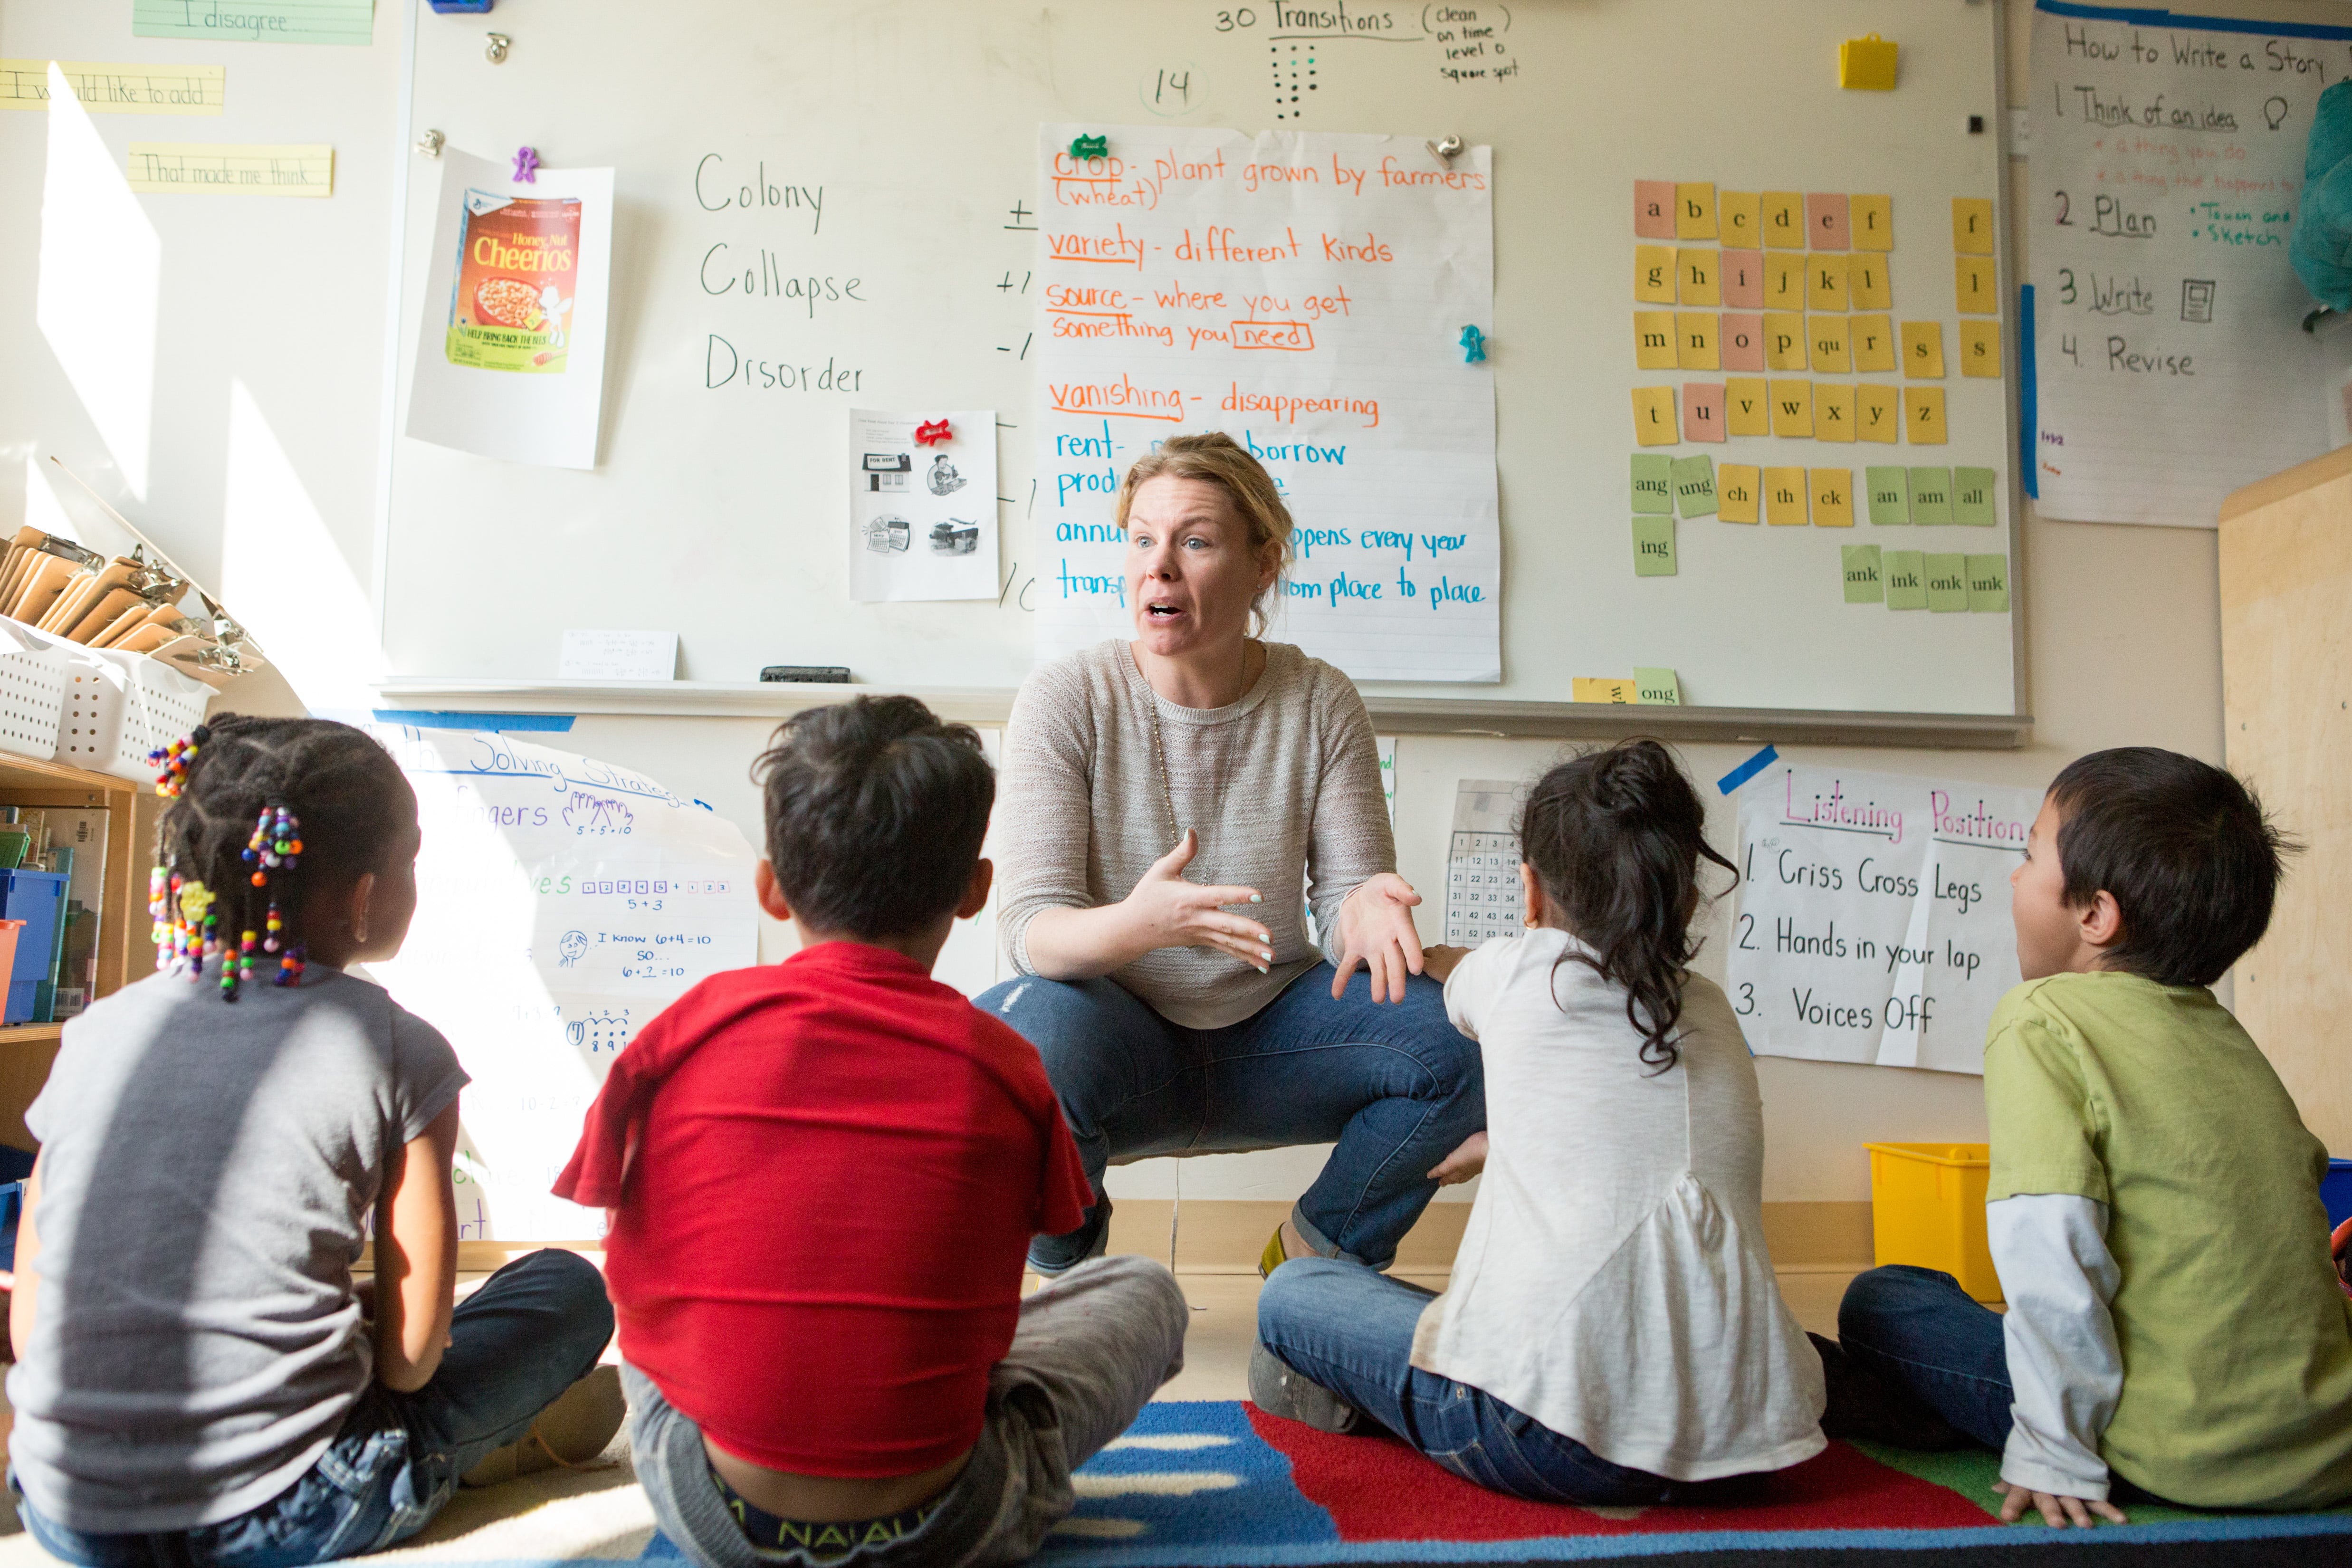 A woman in a white shirt and jeans crouches in front of and speaks to students sitting on the floor in a classroom. 